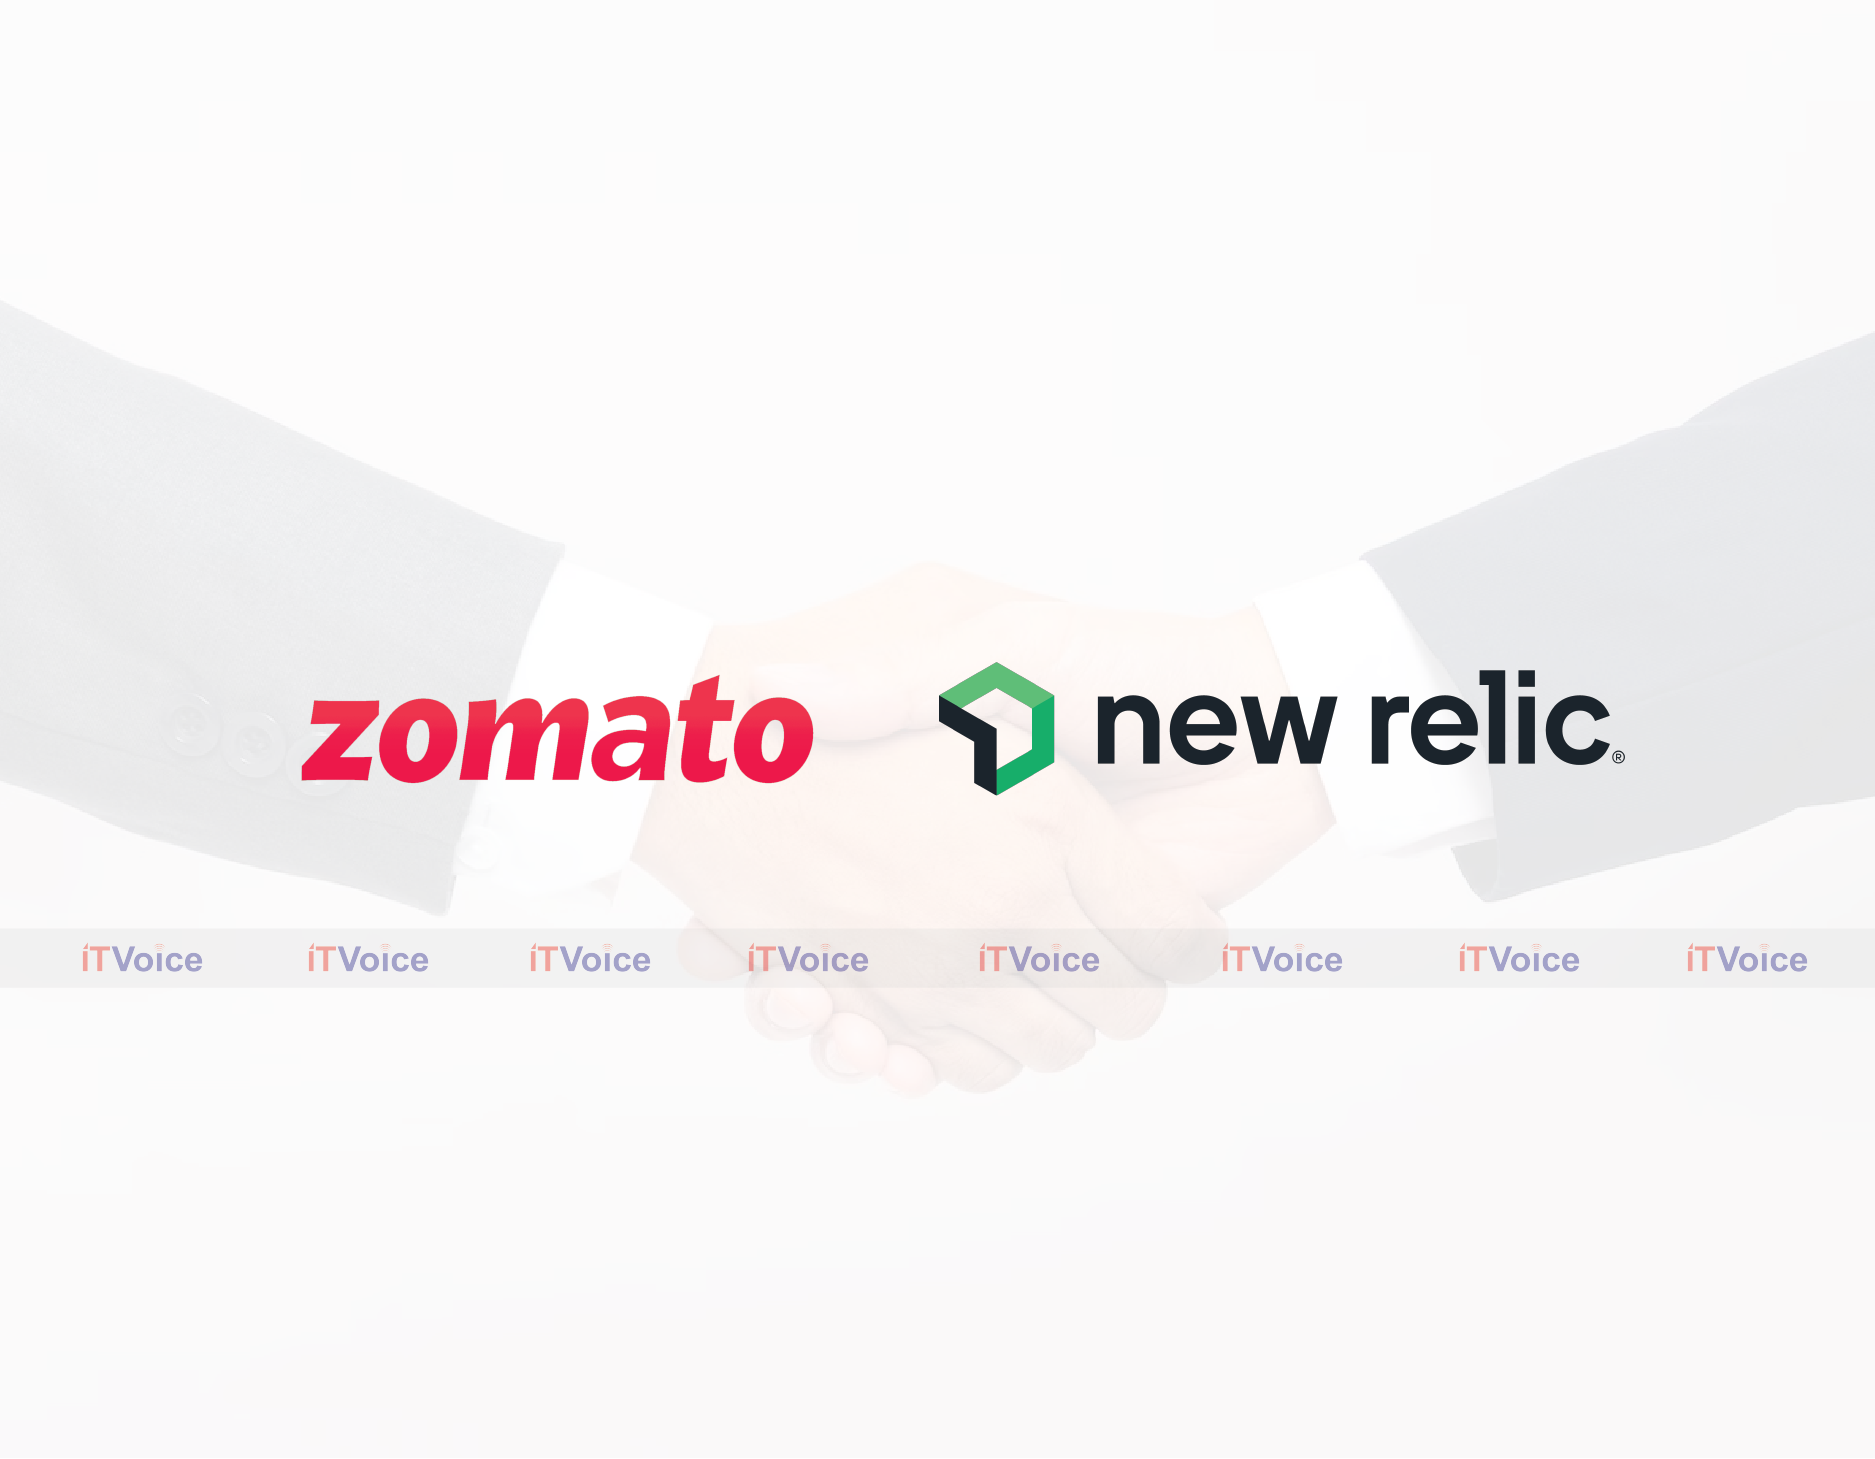 Zomato Expands its Association and Standardises on New Relic